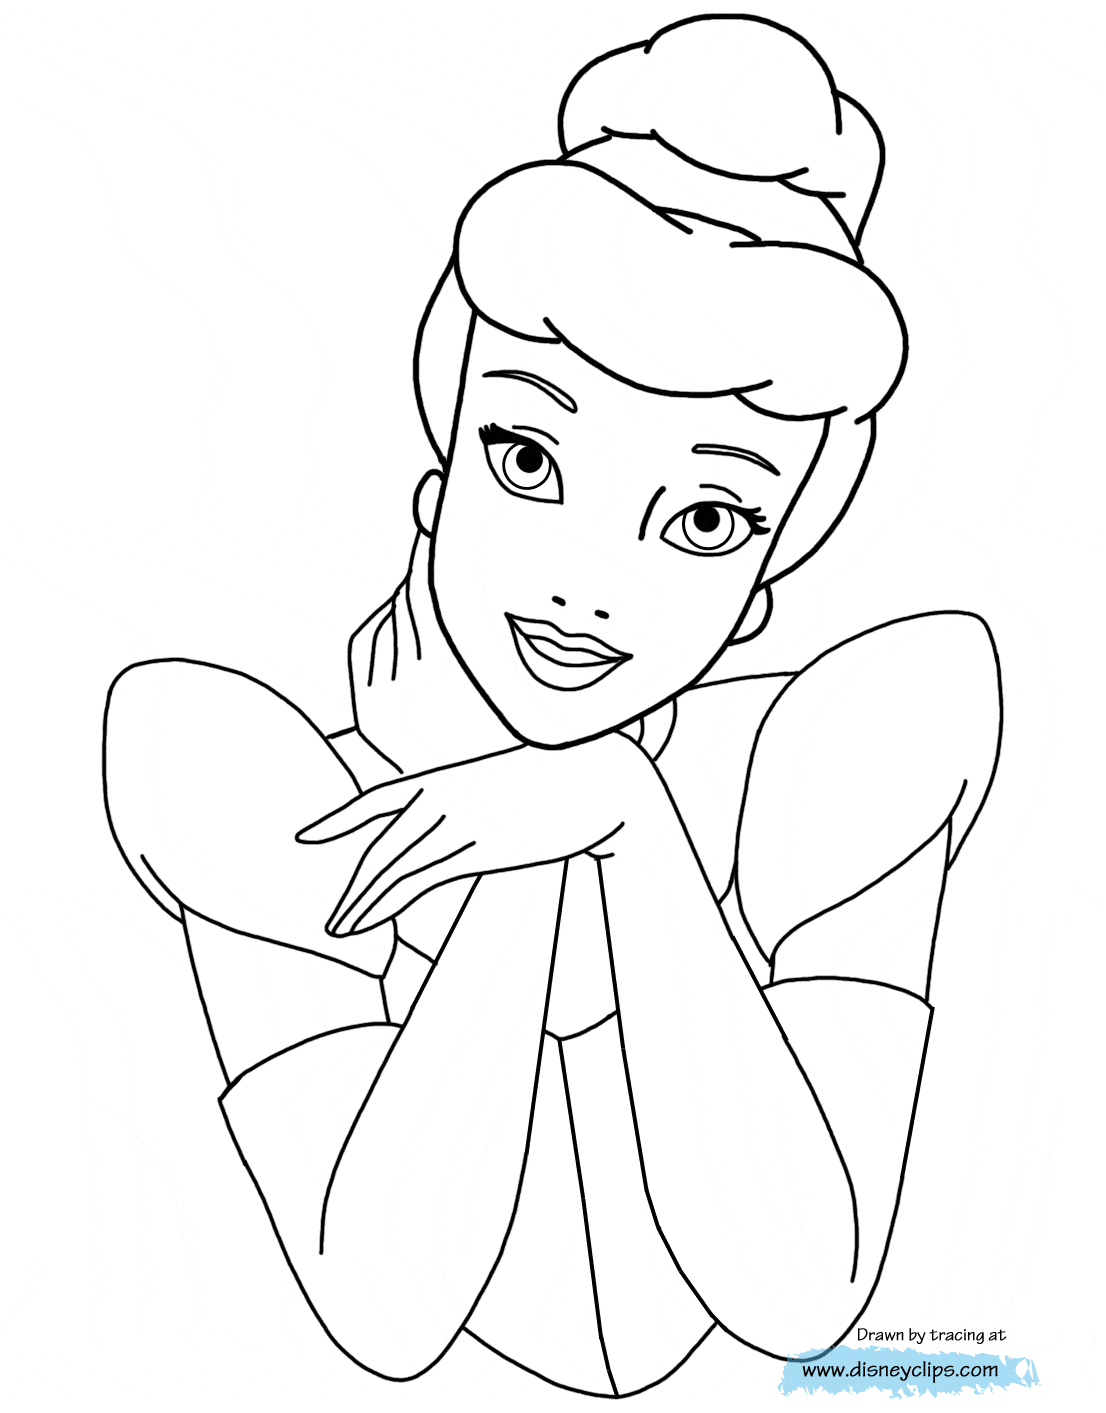 cinderella pictures to print and color cinderella coloring pages print to cinderella color pictures and 